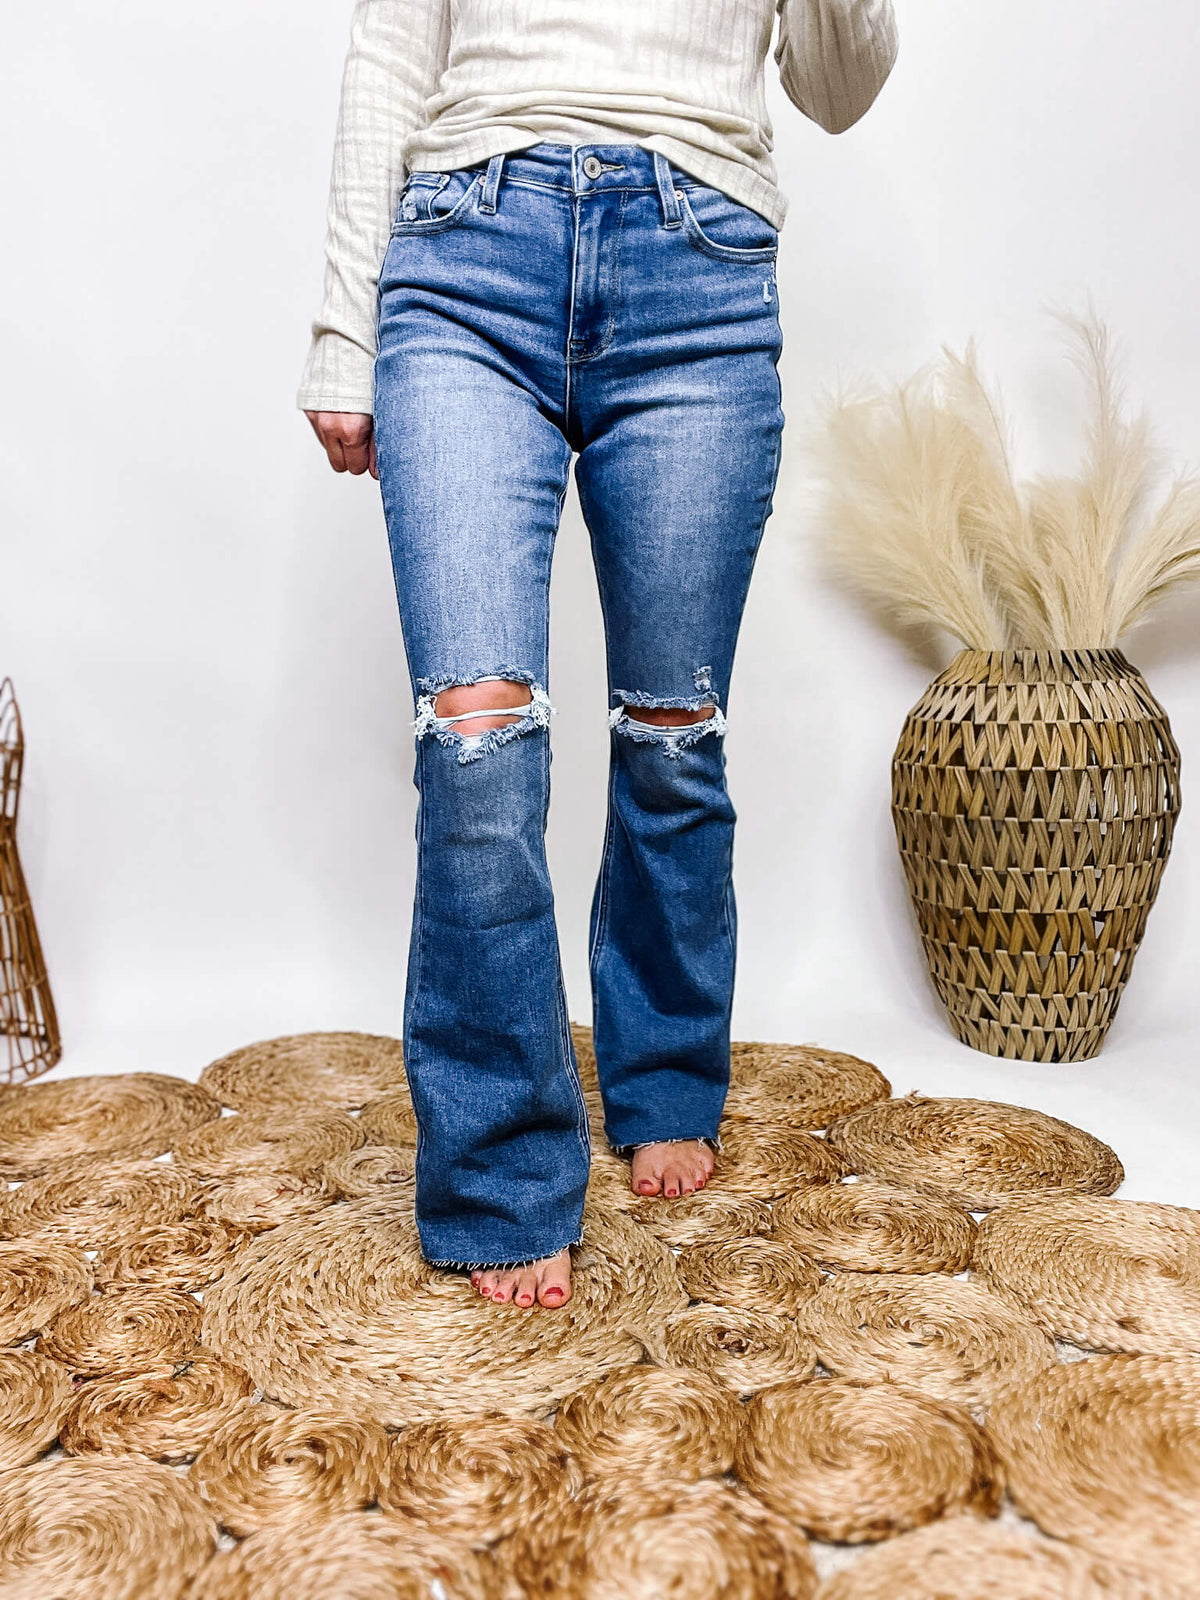 High Rise KanCan Distressed Bootcut Jeans Fitted with Comfort Stretch Raw Seam True to Size 75% Cotton, 23% Tencel, 2% Spandex 10" Rise, 31.5" Inseam